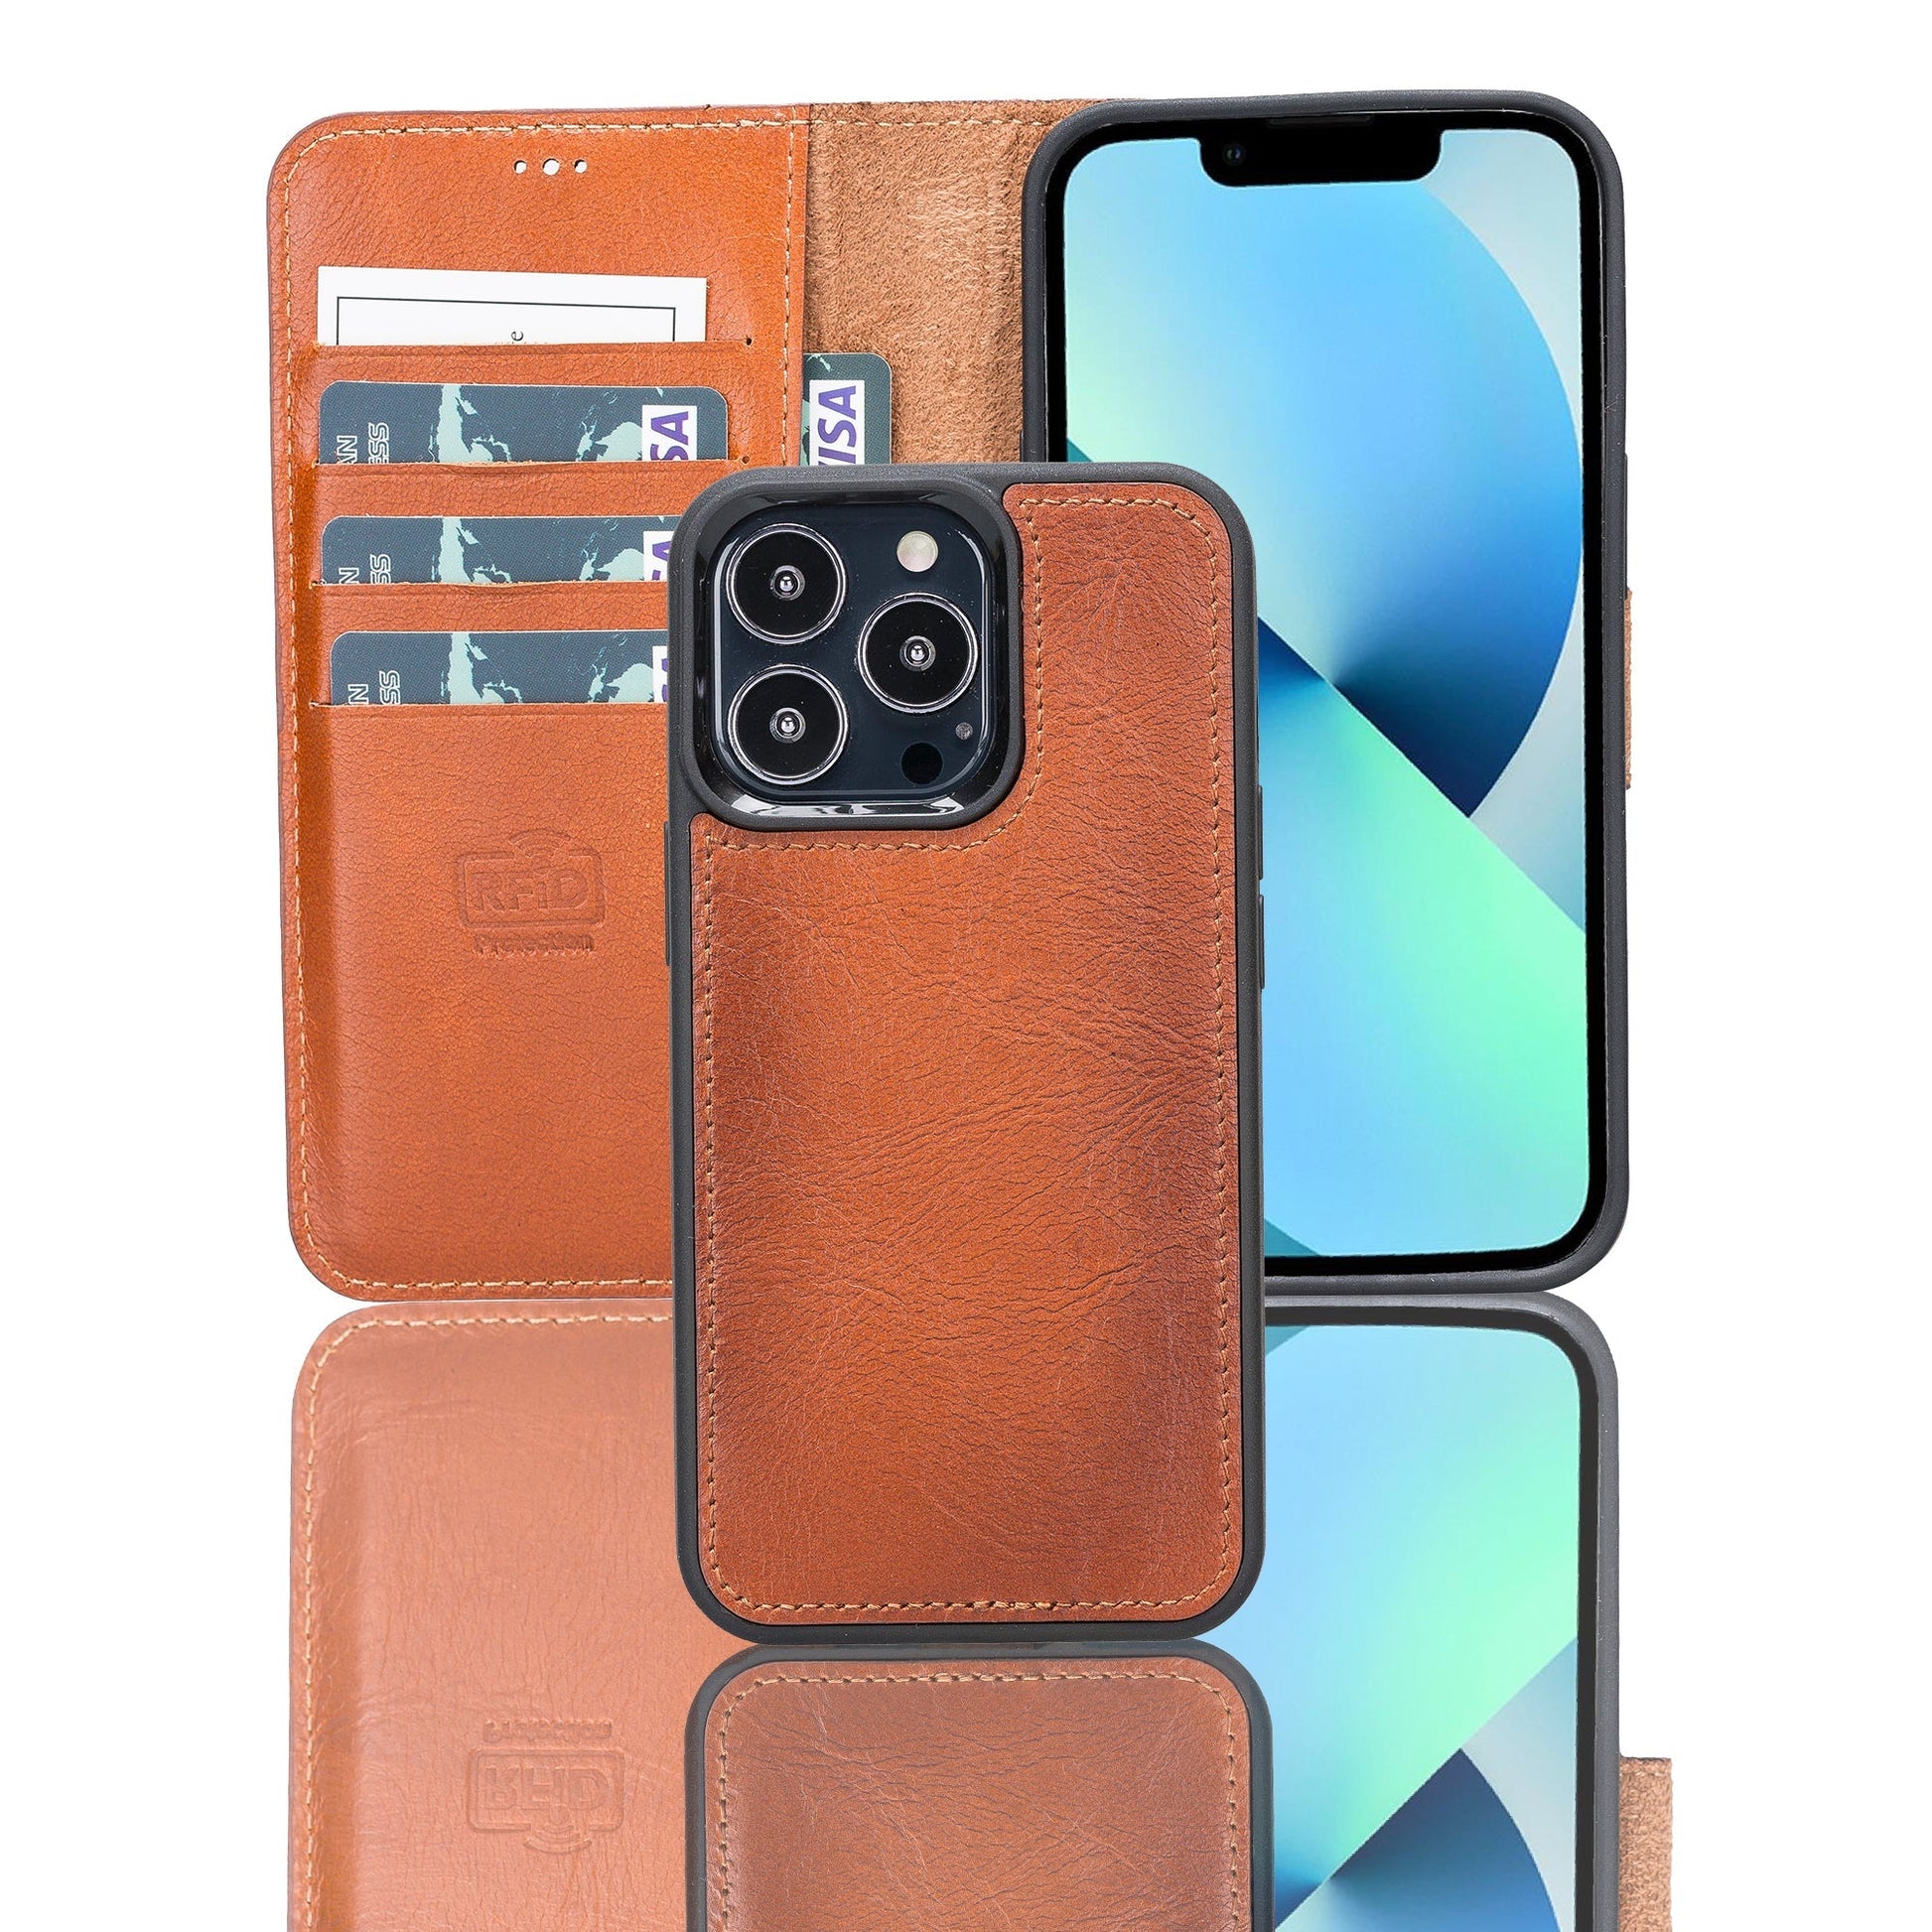 Magnetic Detachable Leather Wallet Case with RFID Blocker for Apple iPhone 11 Pro 5.8 - Nude Pink